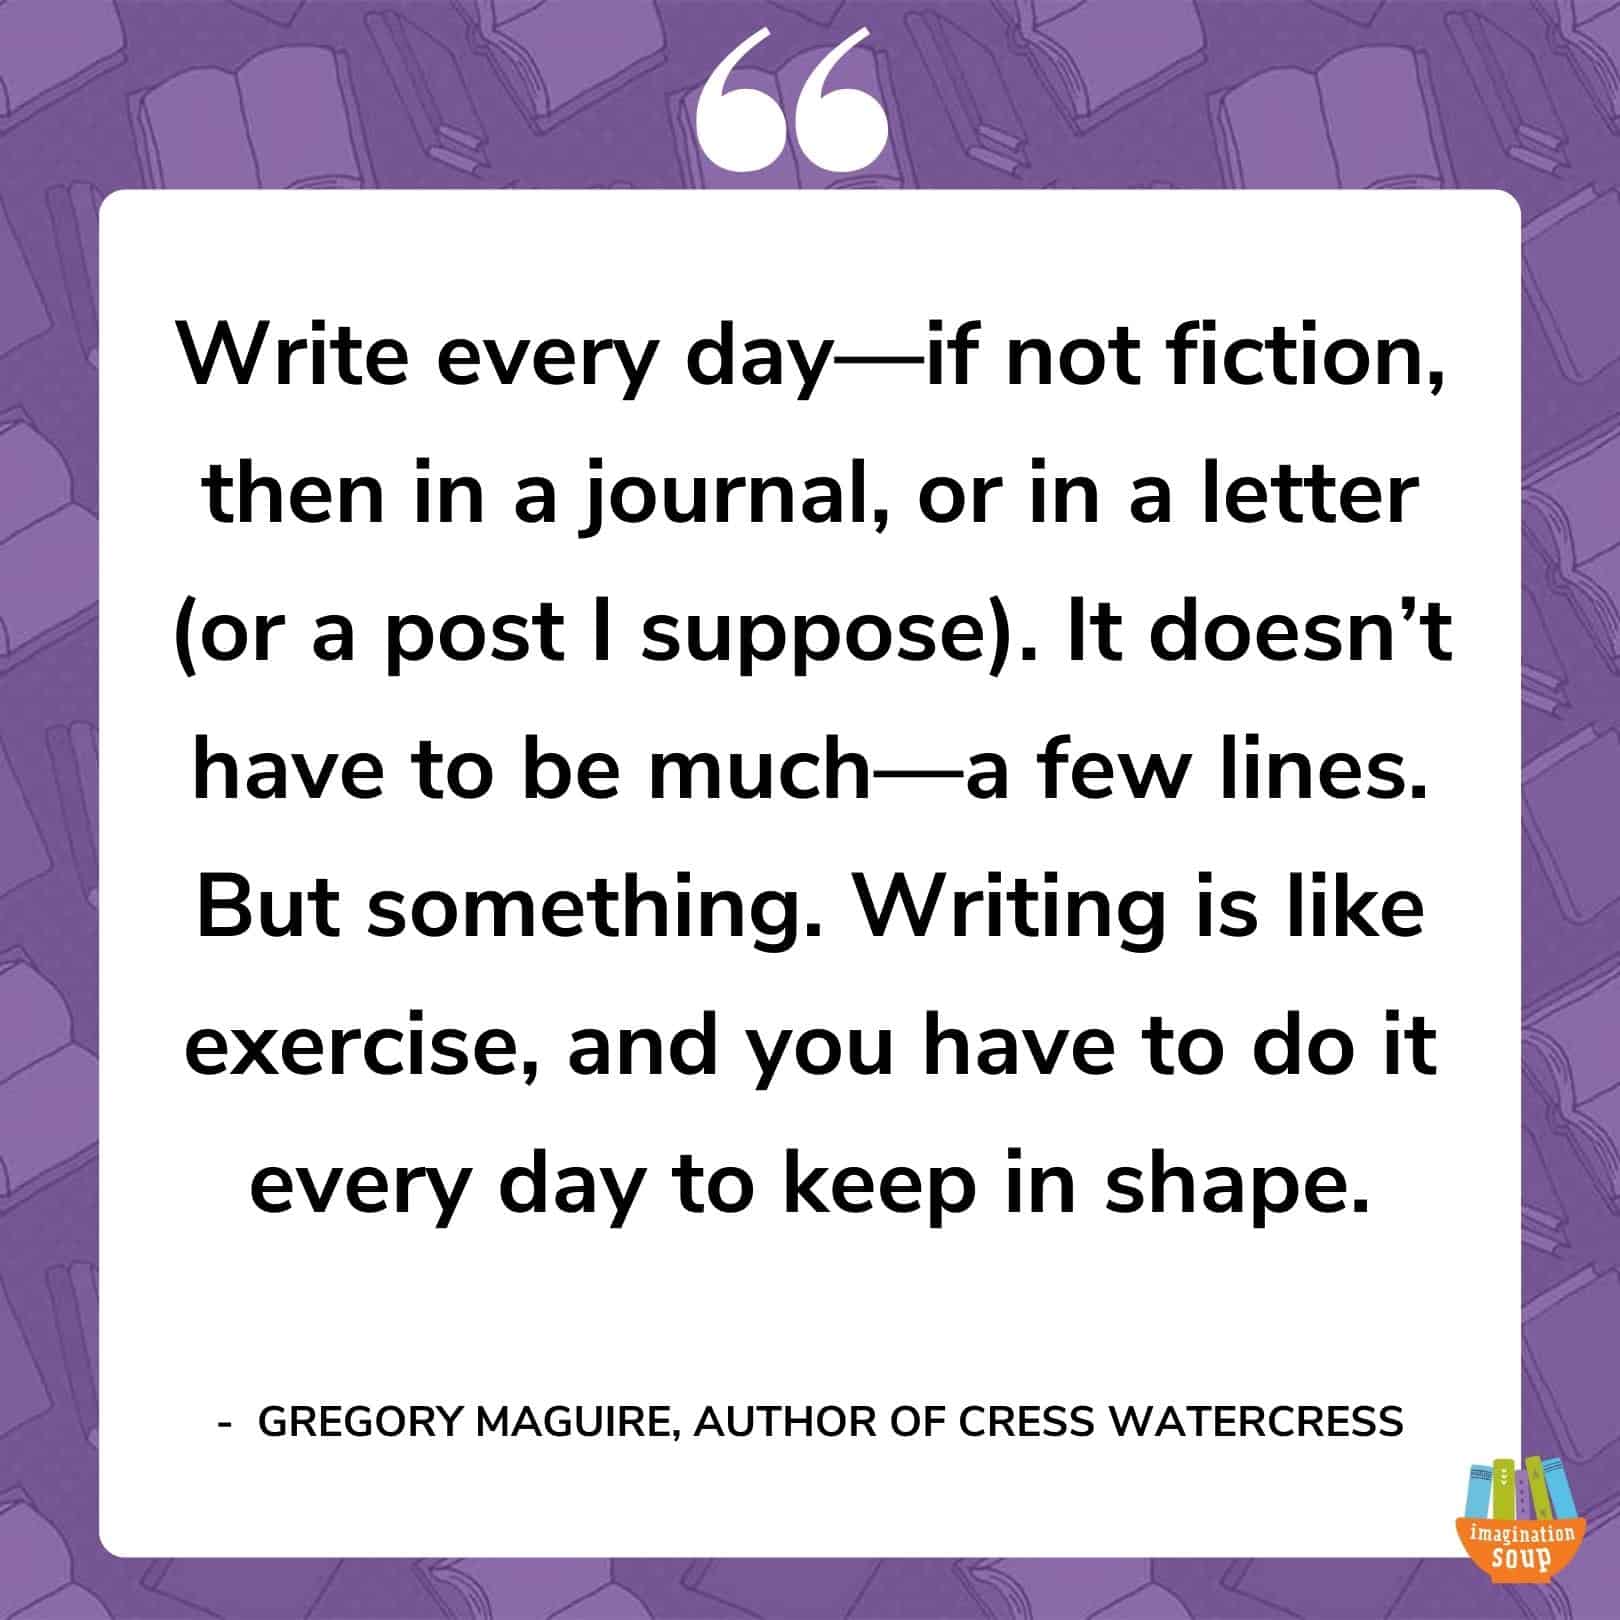 Gregory Maguire advice for writers